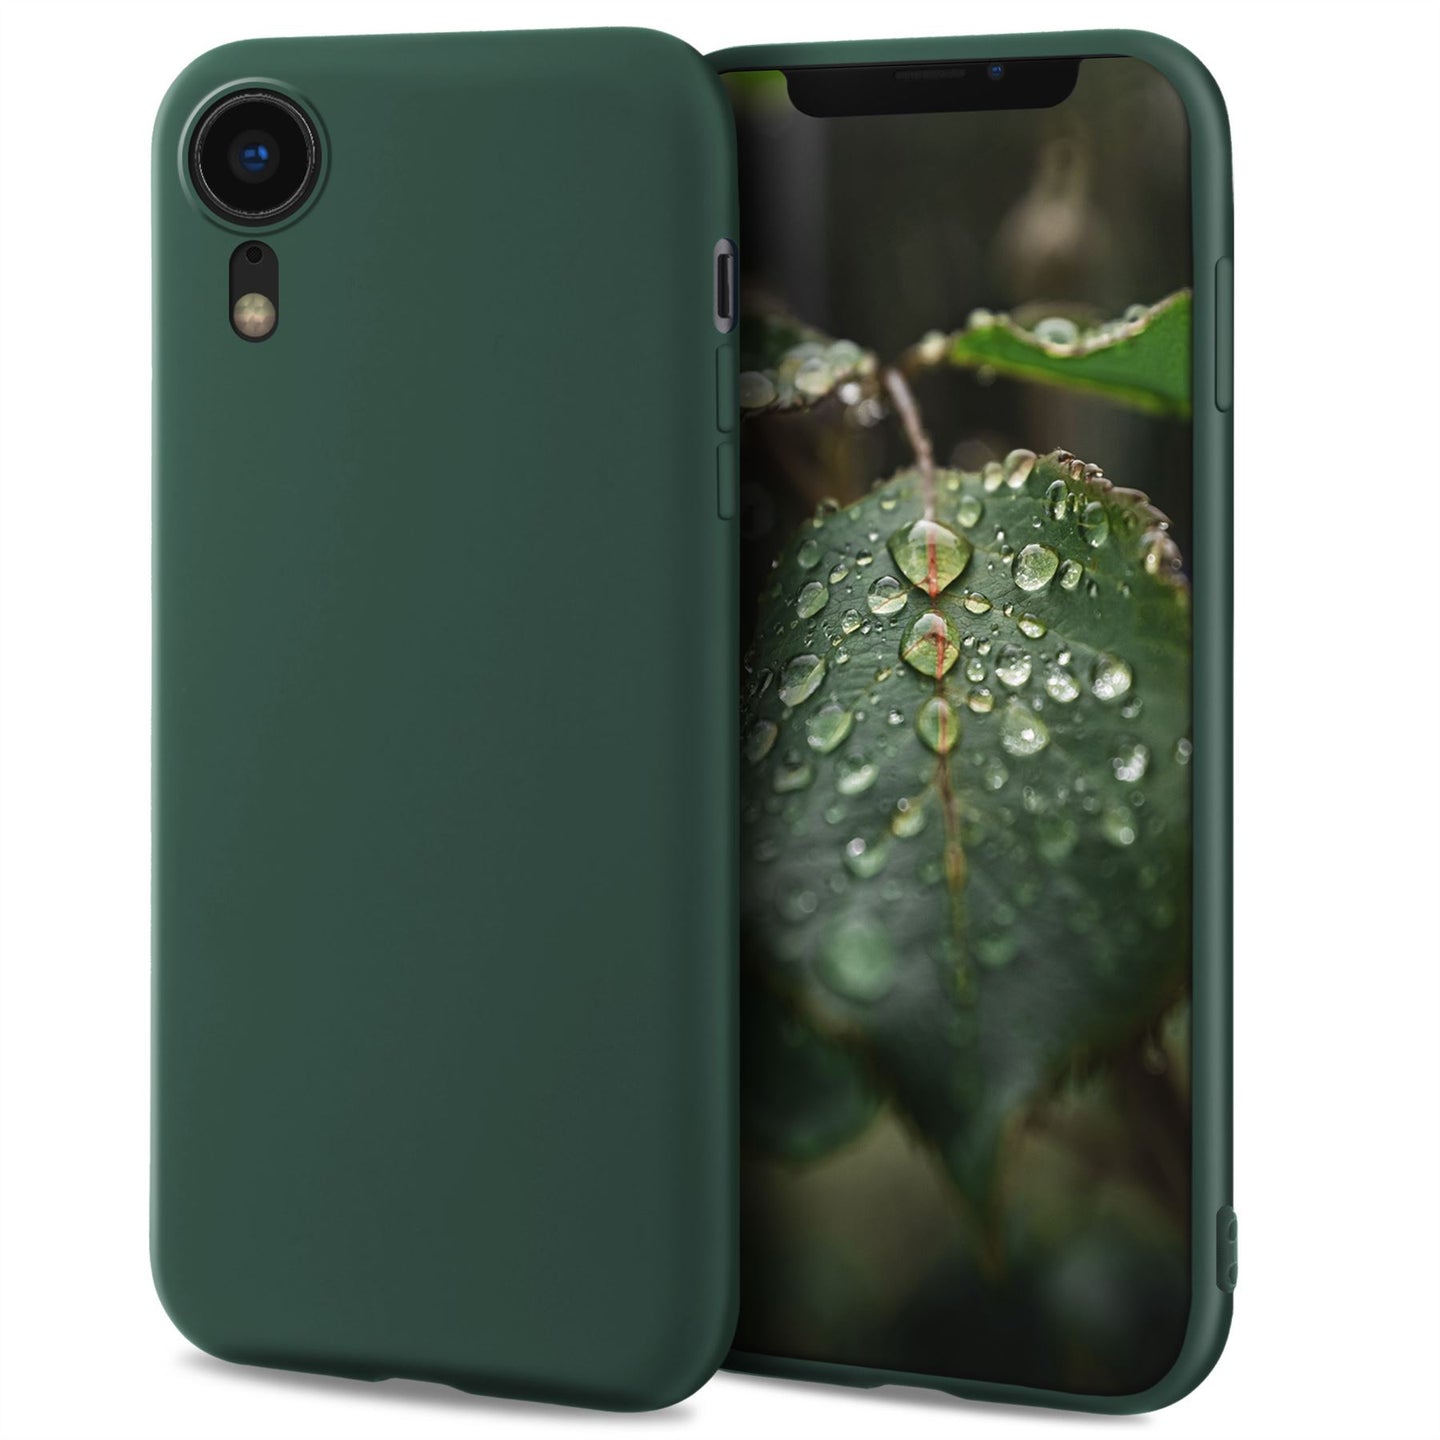 Moozy Lifestyle. Designed for iPhone XR Case, Dark Green - Liquid Silicone Cover with Matte Finish and Soft Microfiber Lining